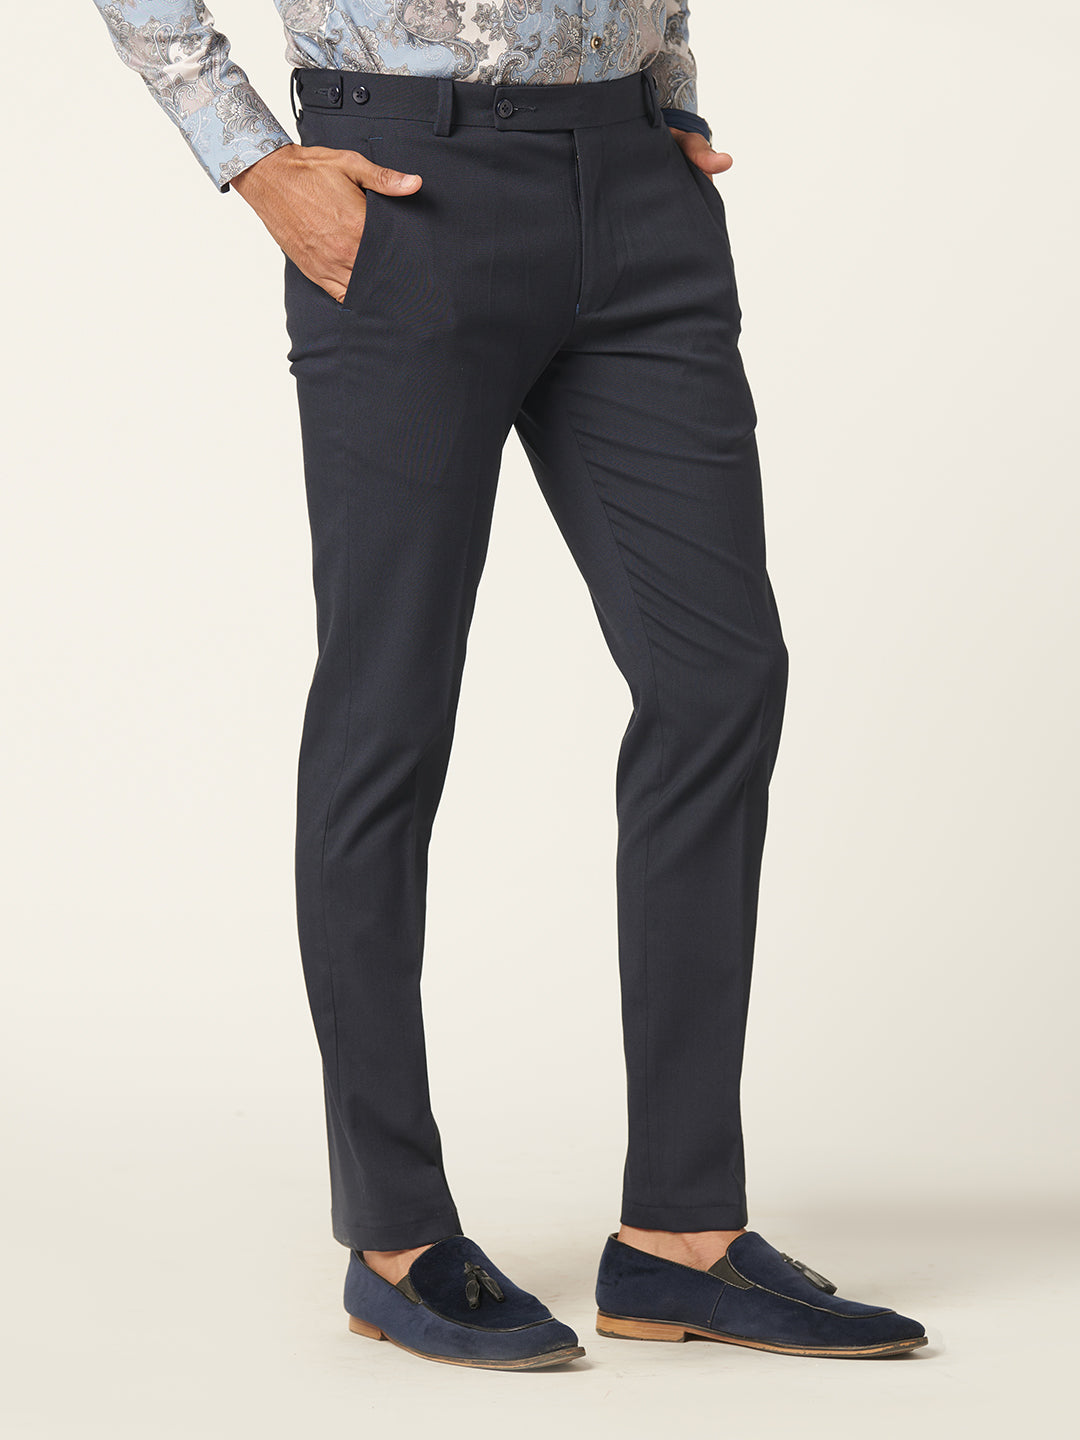 WILL SERVIVE TROUSER